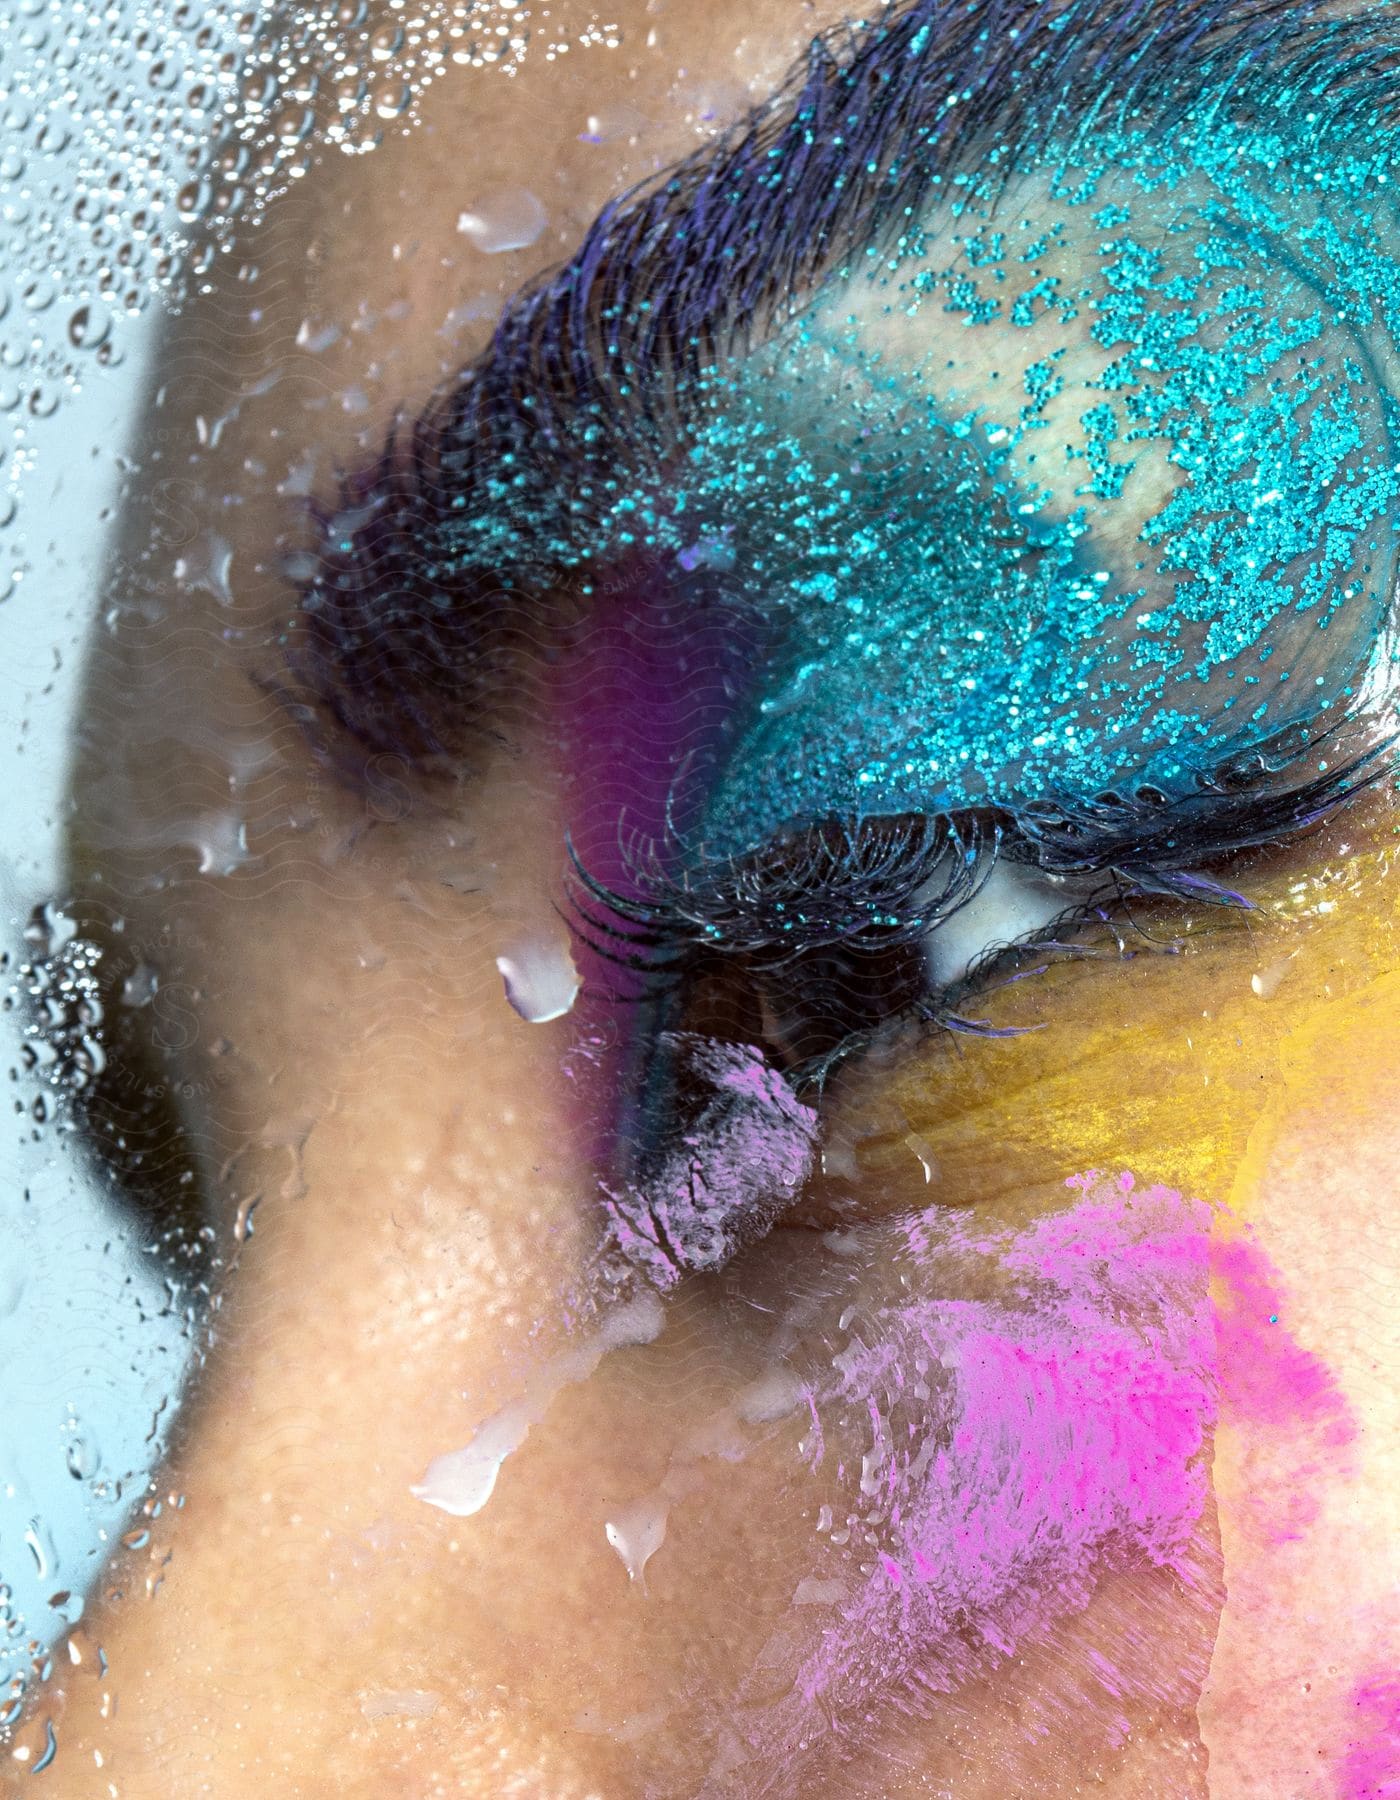 Stock photo of close-up of a woman's face with colorful, bright makeup.